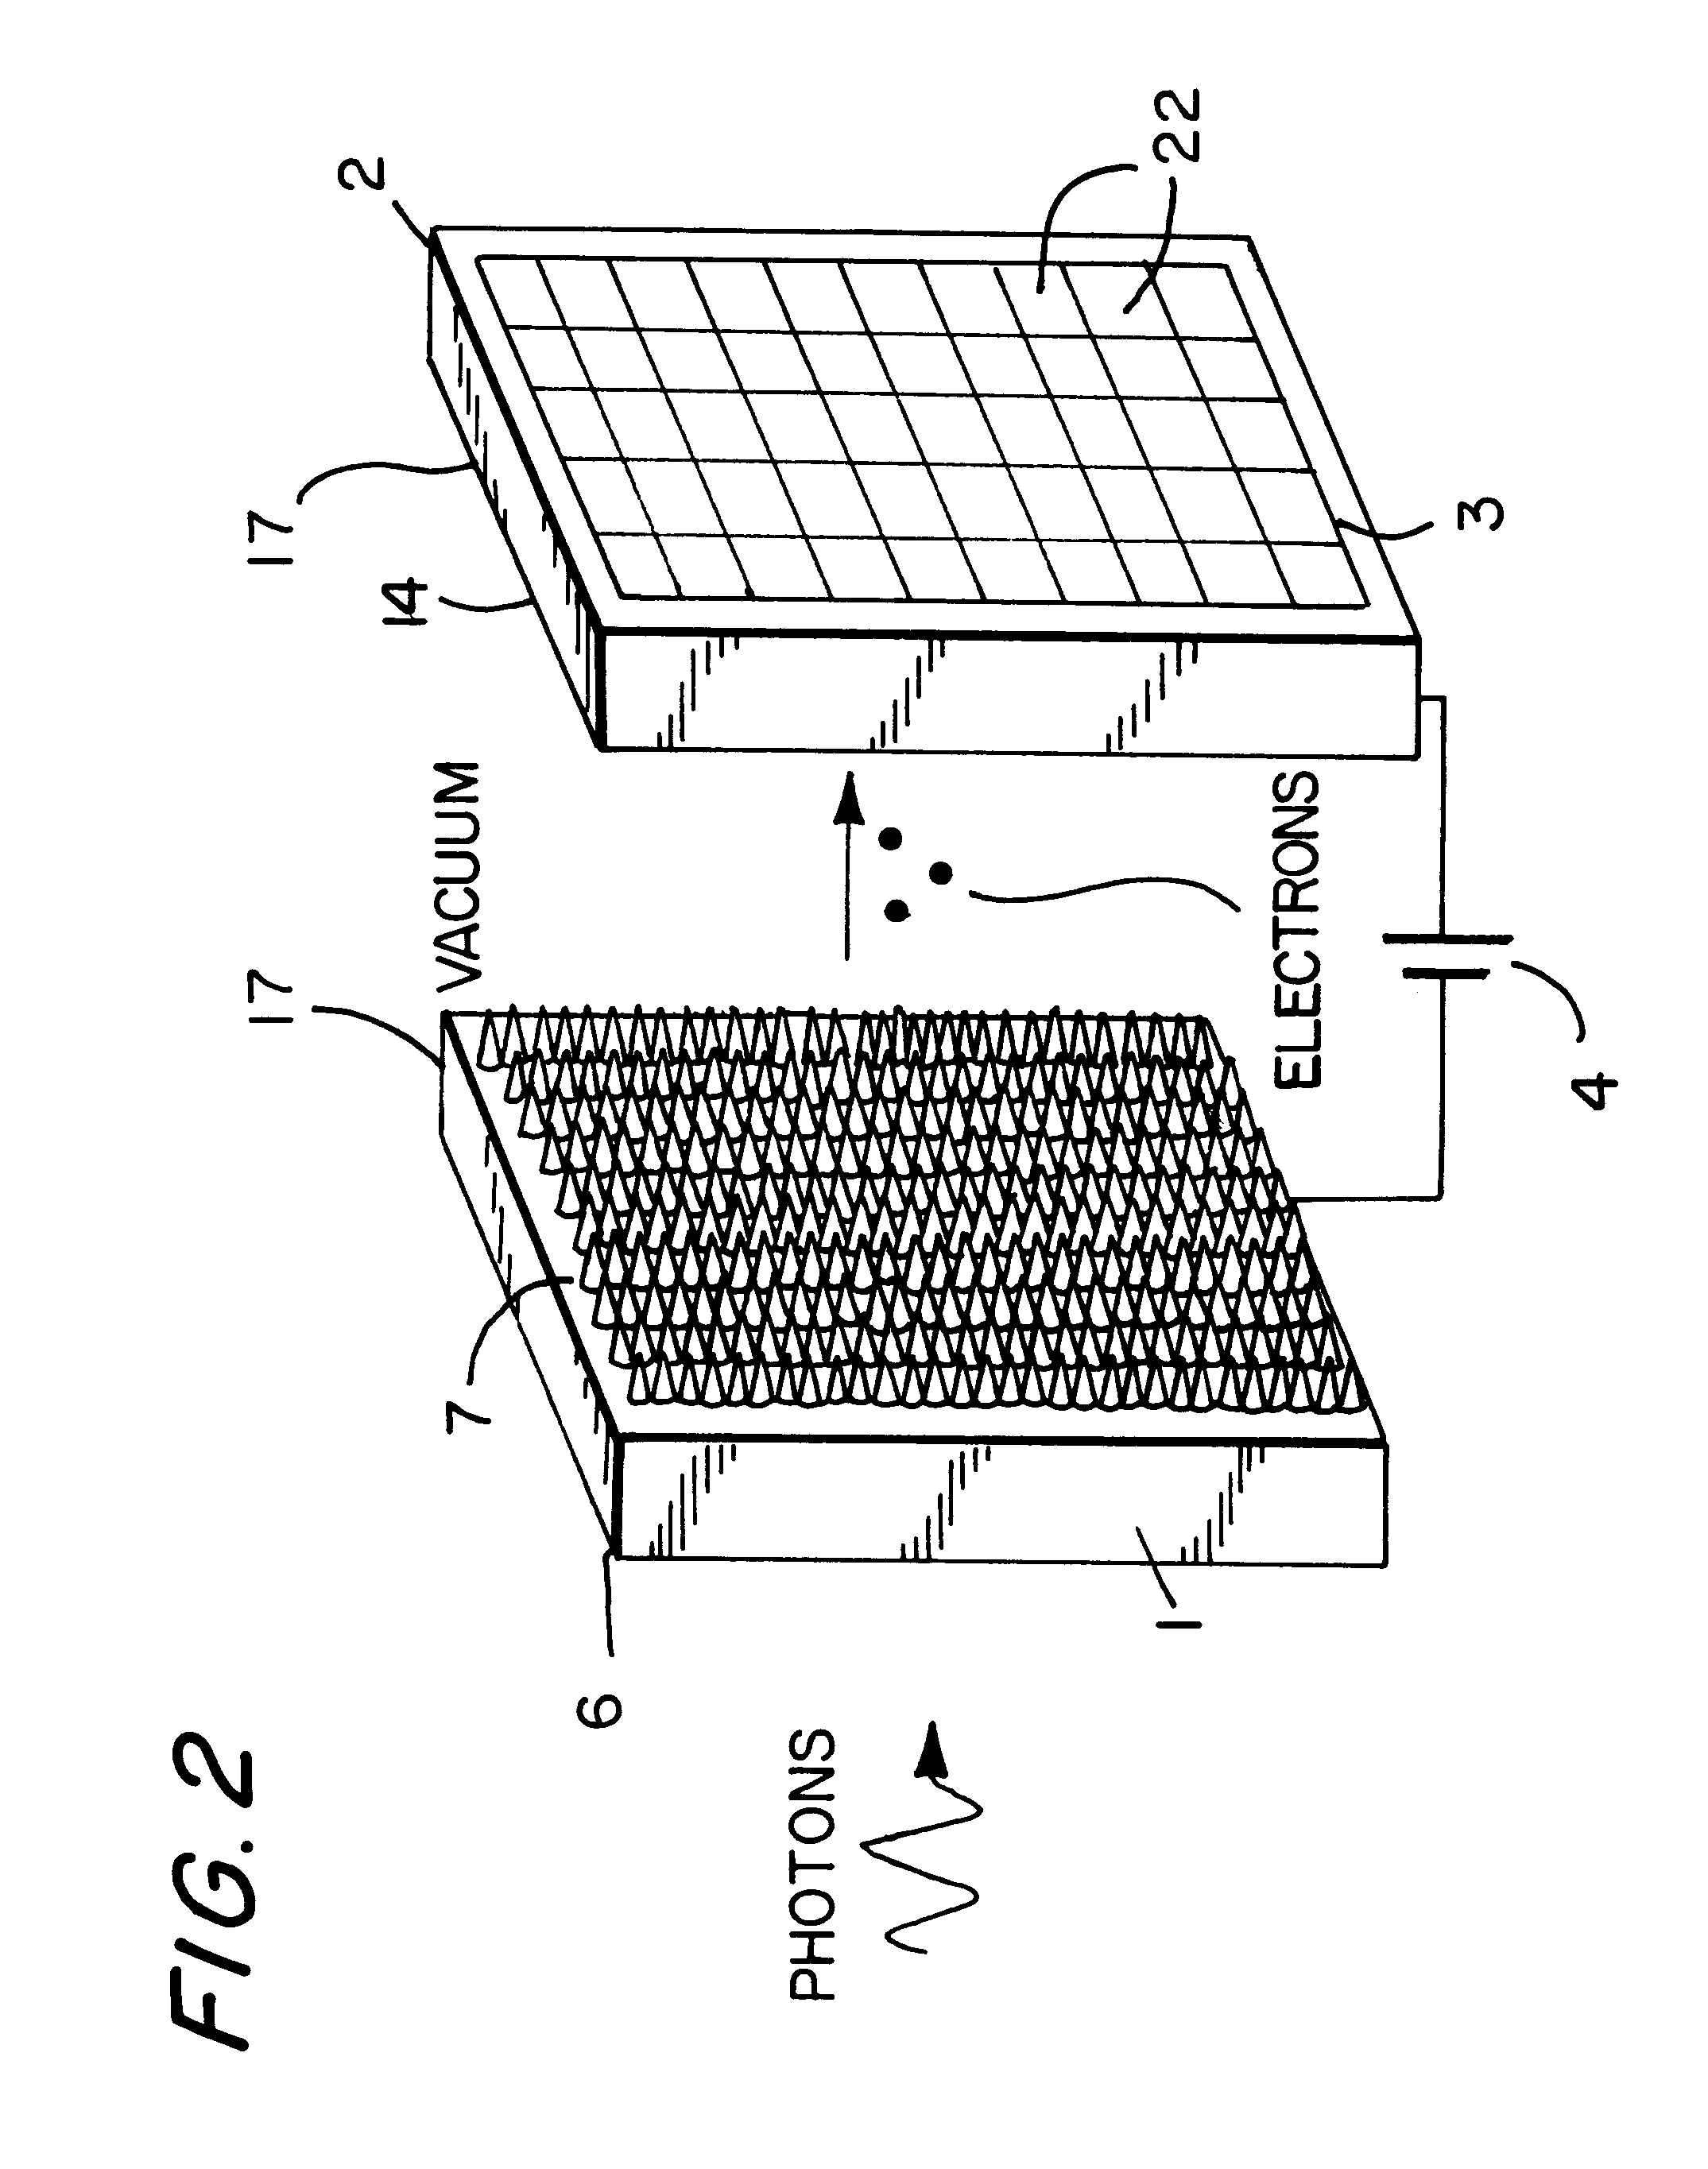 Semiconductor X-ray photocathodes devices